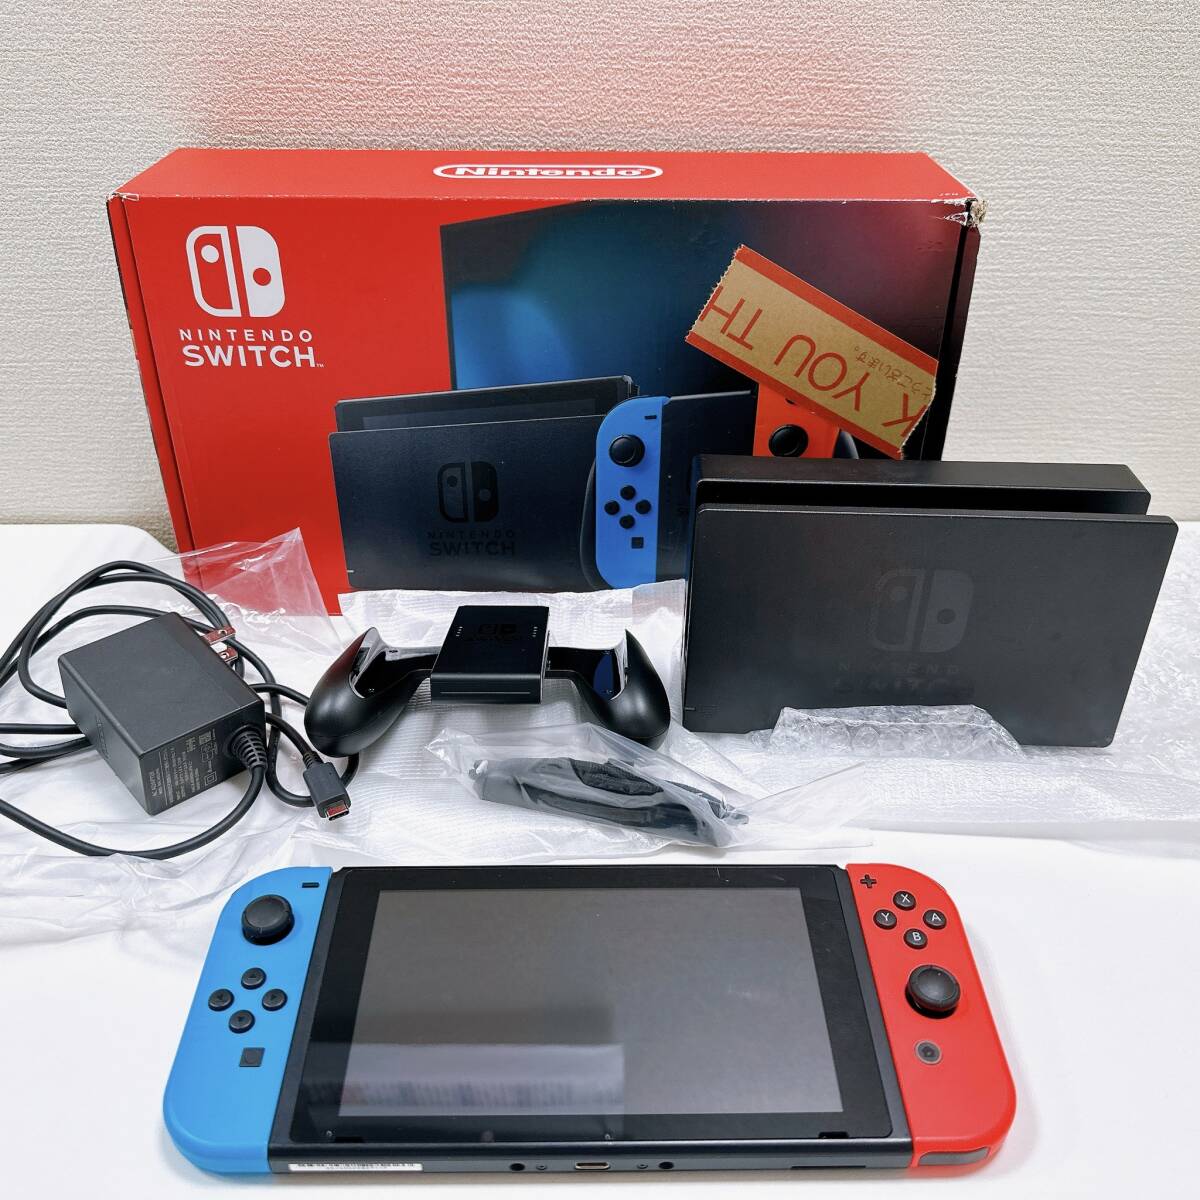 [ART-5540] 1 jpy ~ nintendo Nintendo switch HAD-S-KABAA body Joy-Con neon blue neon red Nintendo Switch game the first period . settled 